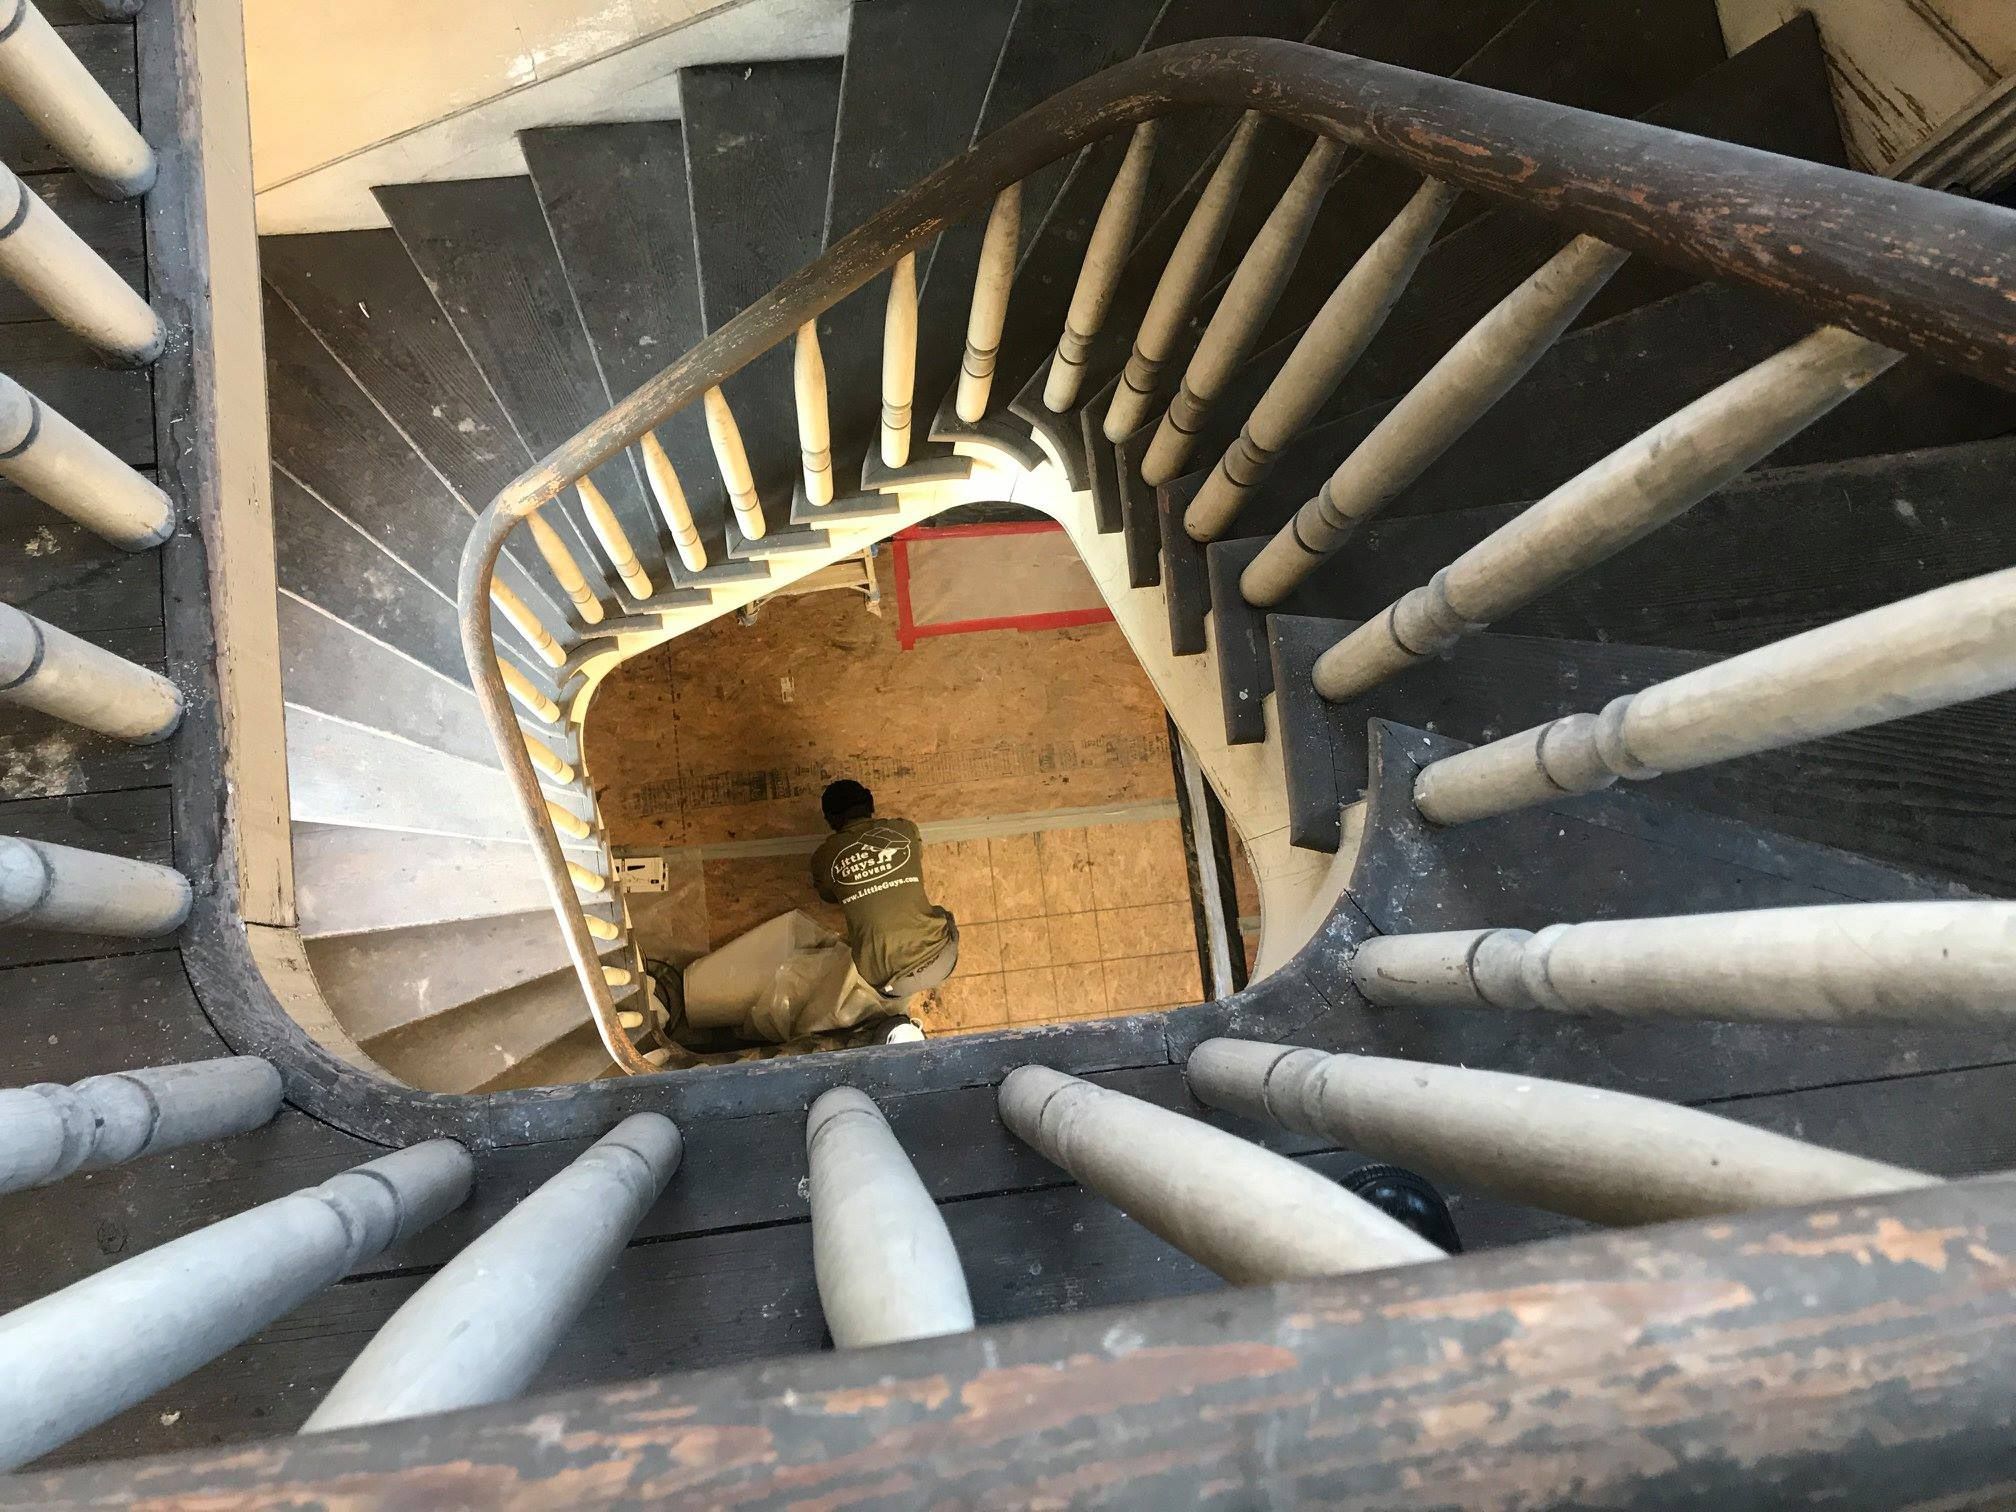 Staircase viewed from above with Little Guy employee at the bottom